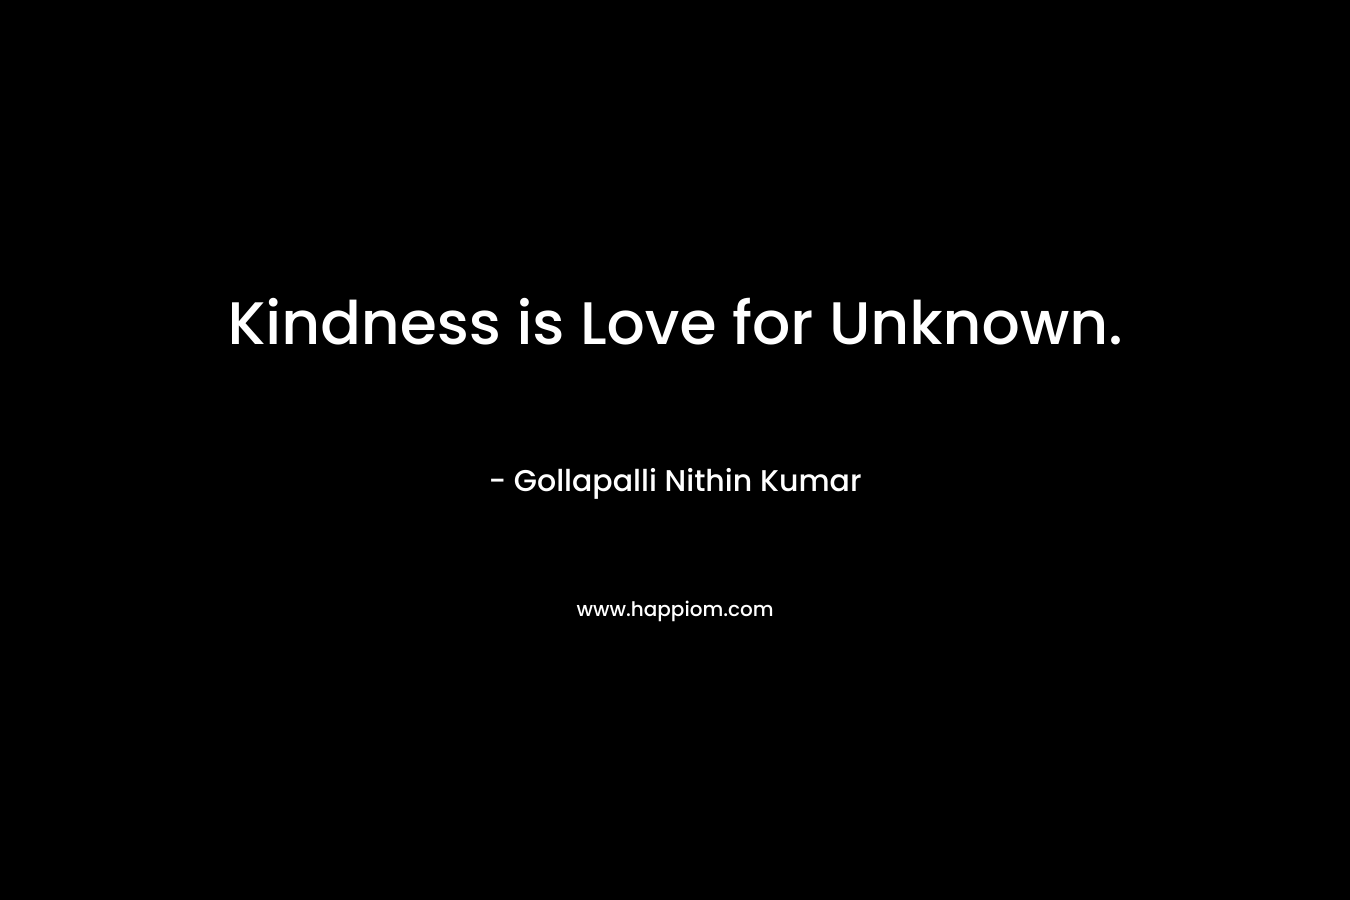 Kindness is Love for Unknown. – Gollapalli Nithin Kumar